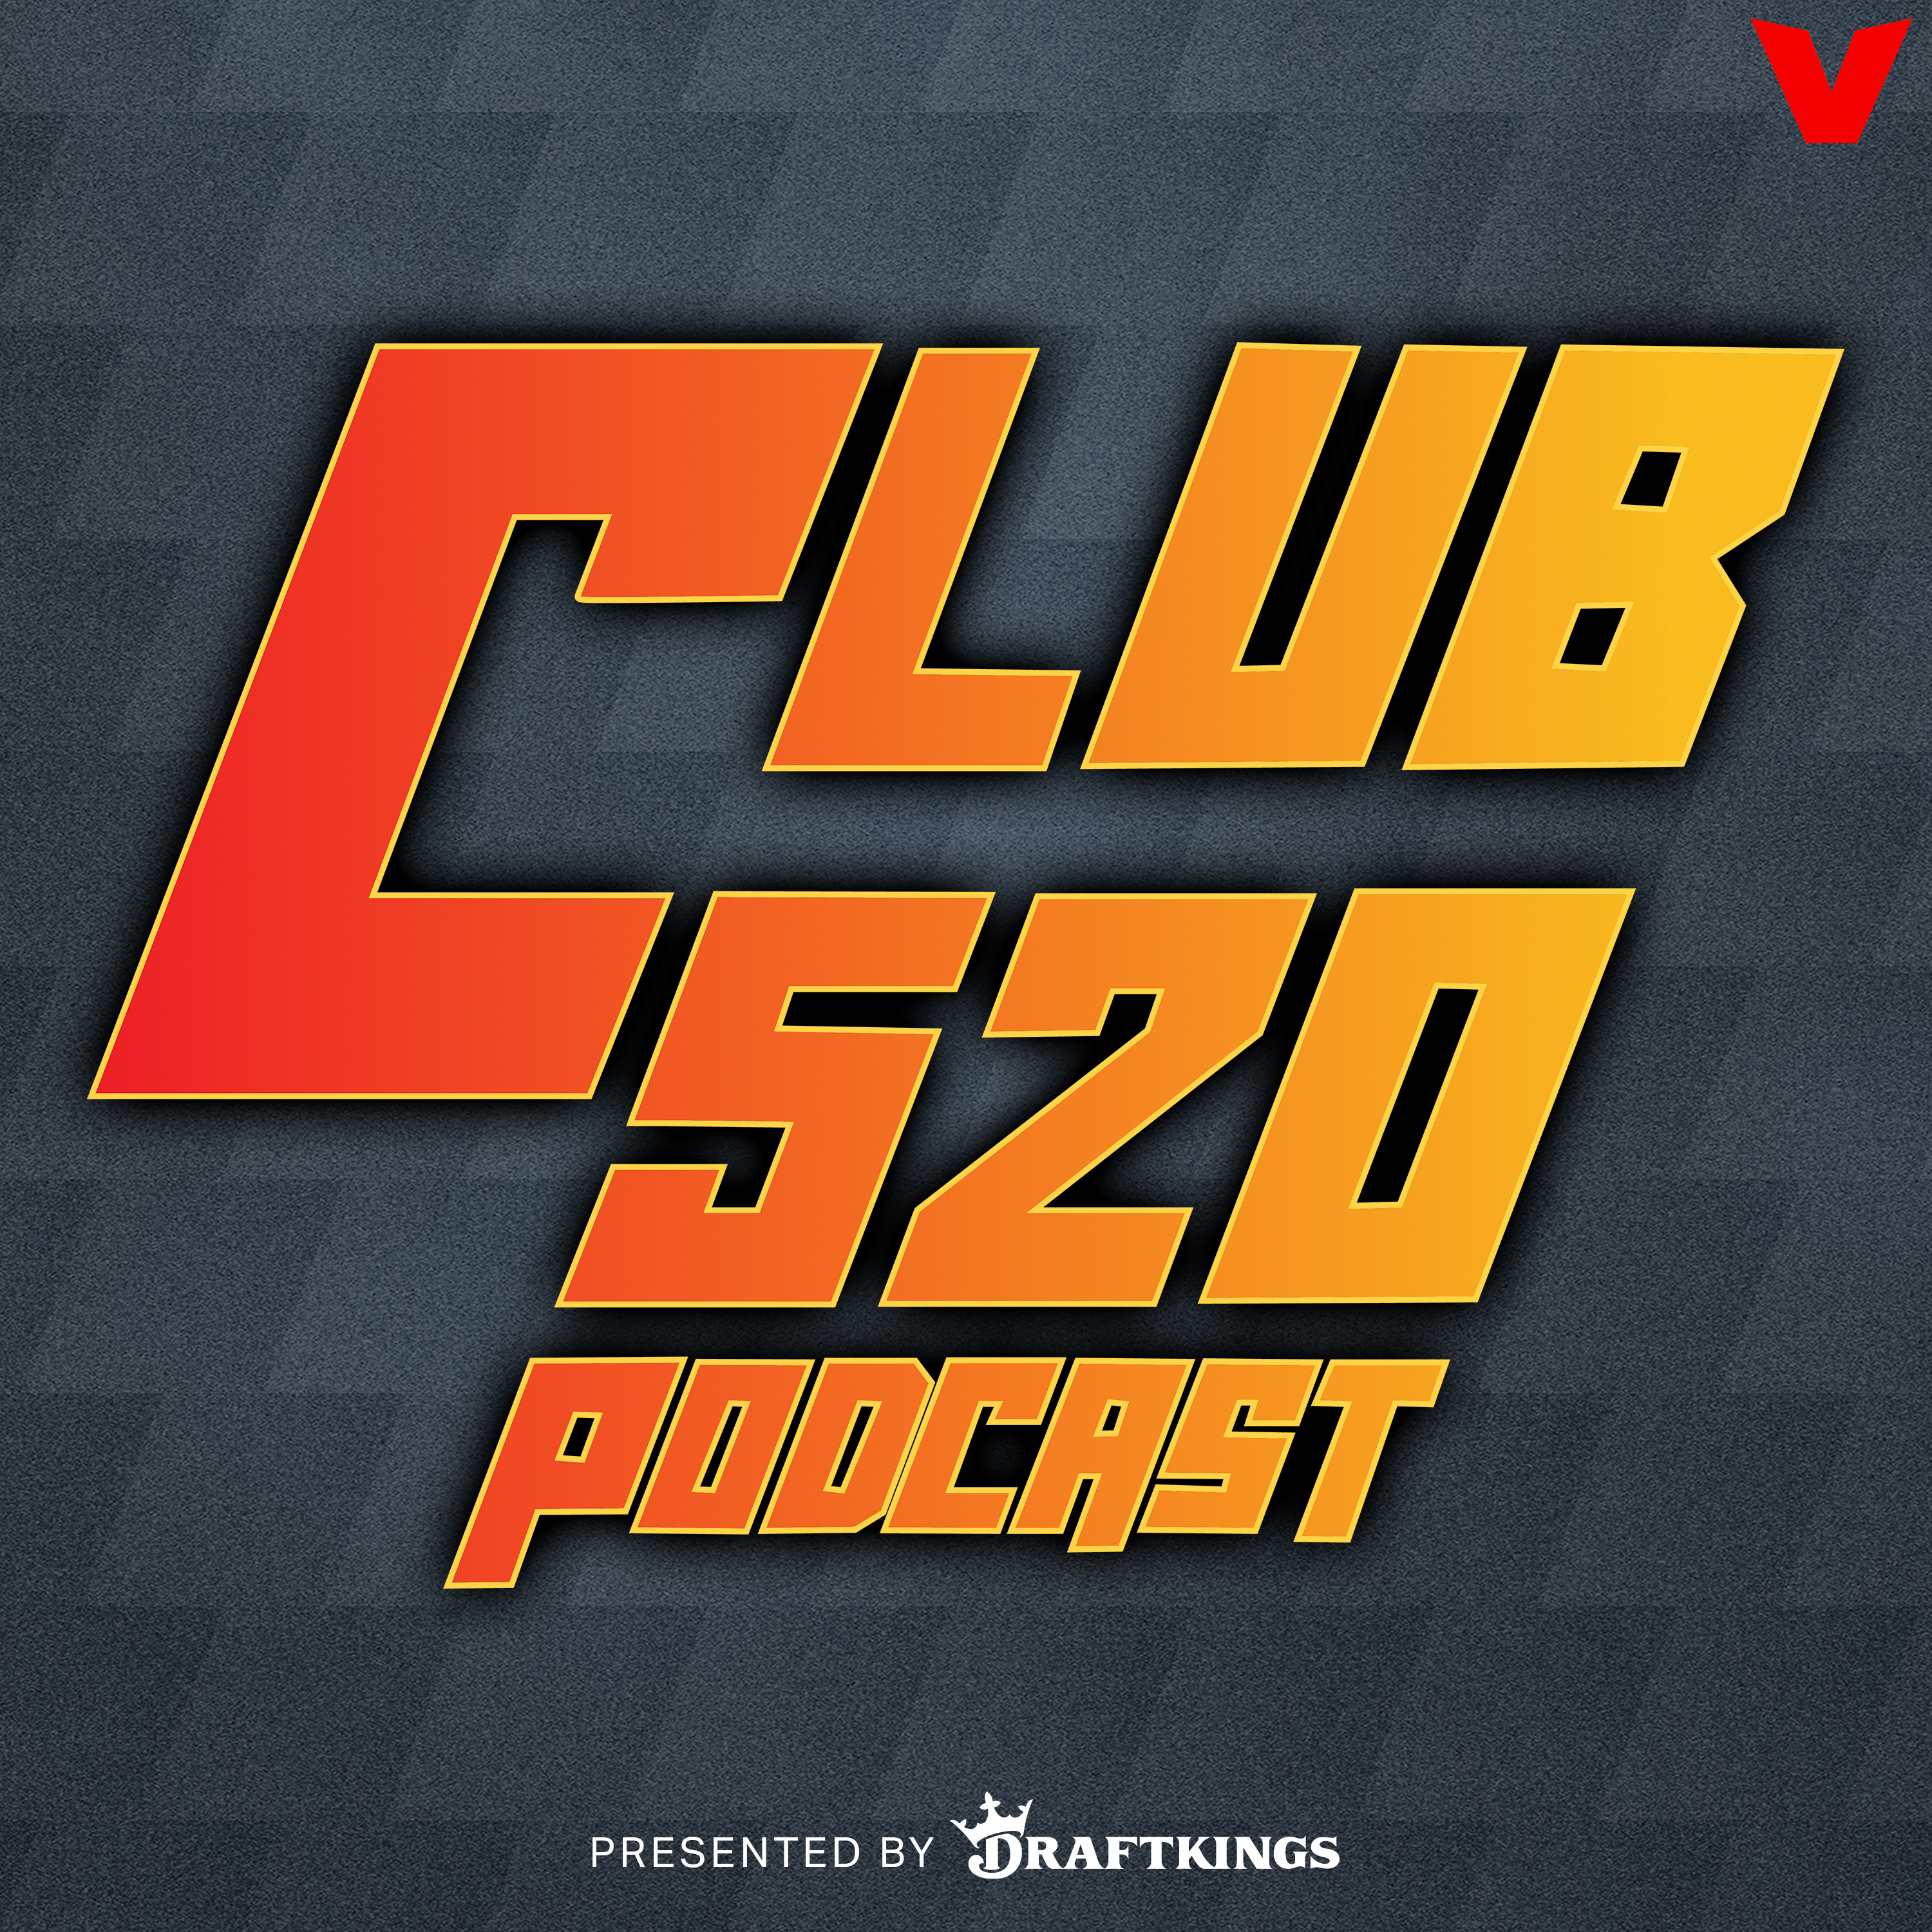 Club 520 - Jeff Teague on why Vince Carter is BETTER than Kawhi + Drake vs. Michael Jackson by iHeartPodcasts and The Volume